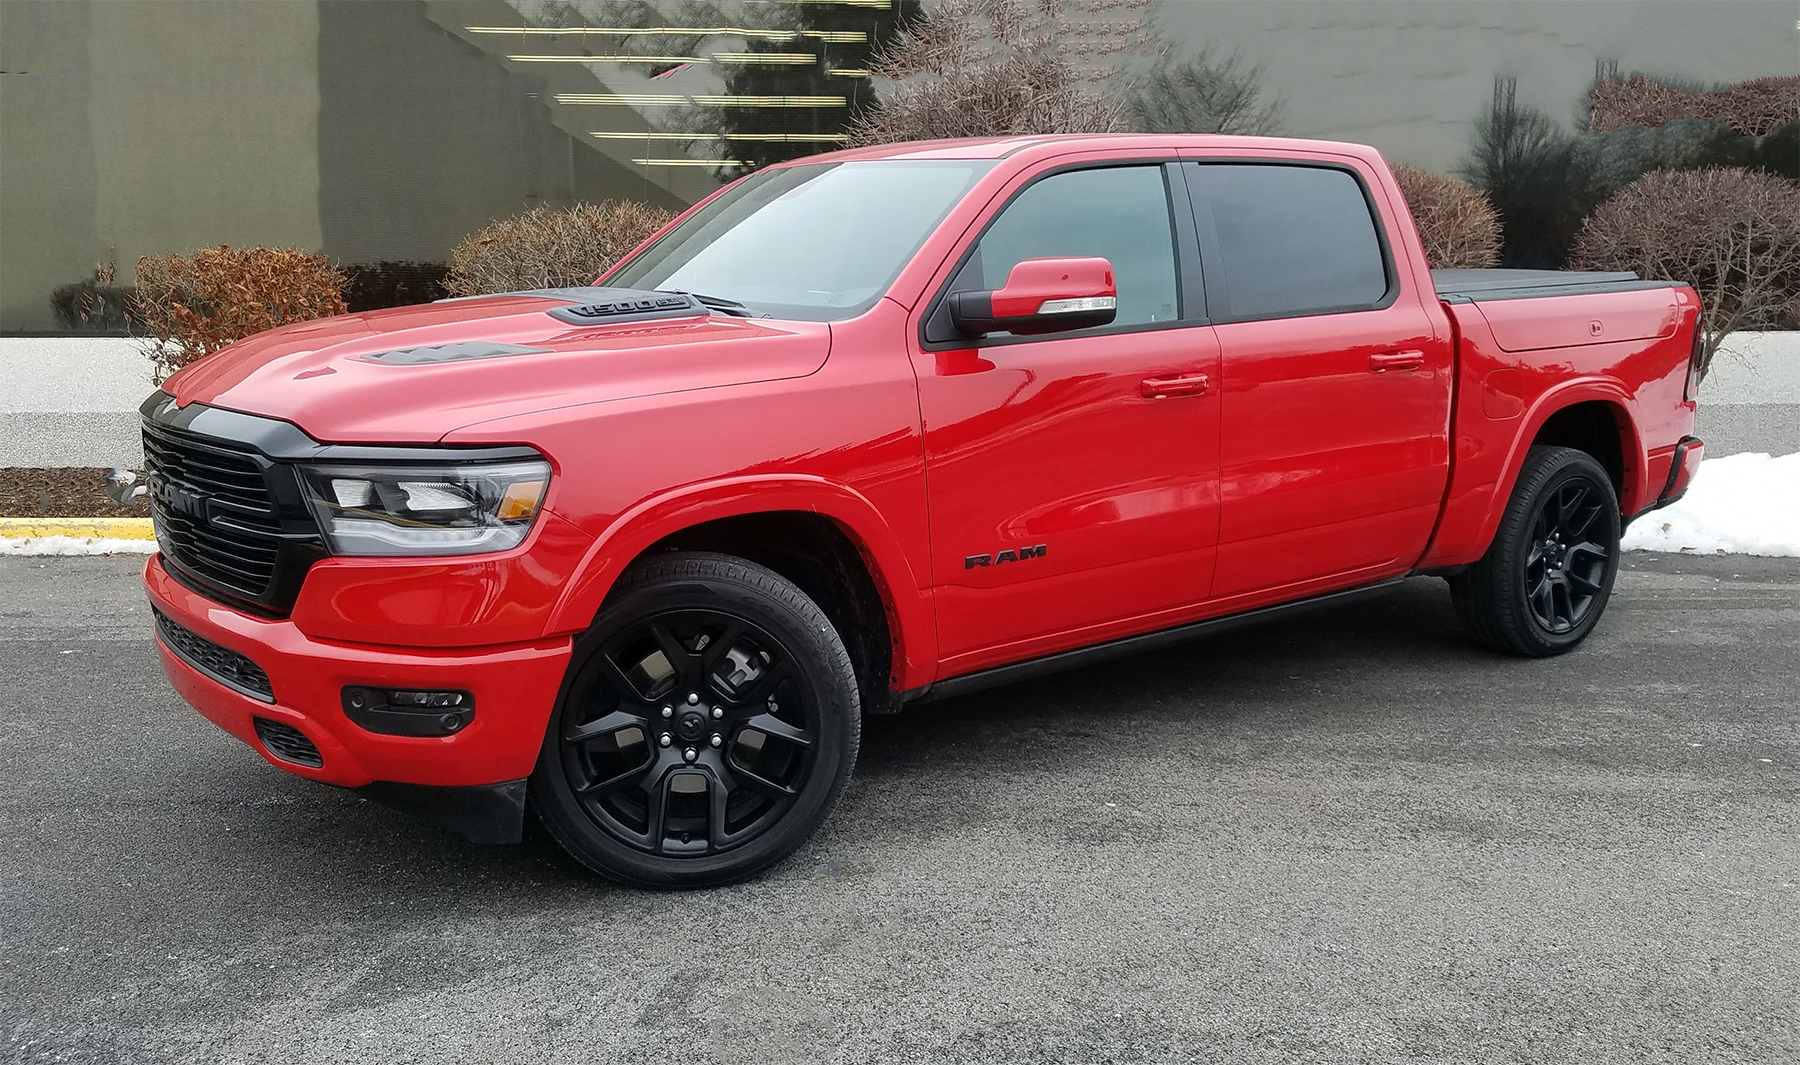 Quick Spin: 2020 Ram 1500 Laramie | The Daily Drive | Consumer Guide® The  Daily Drive | Consumer Guide®